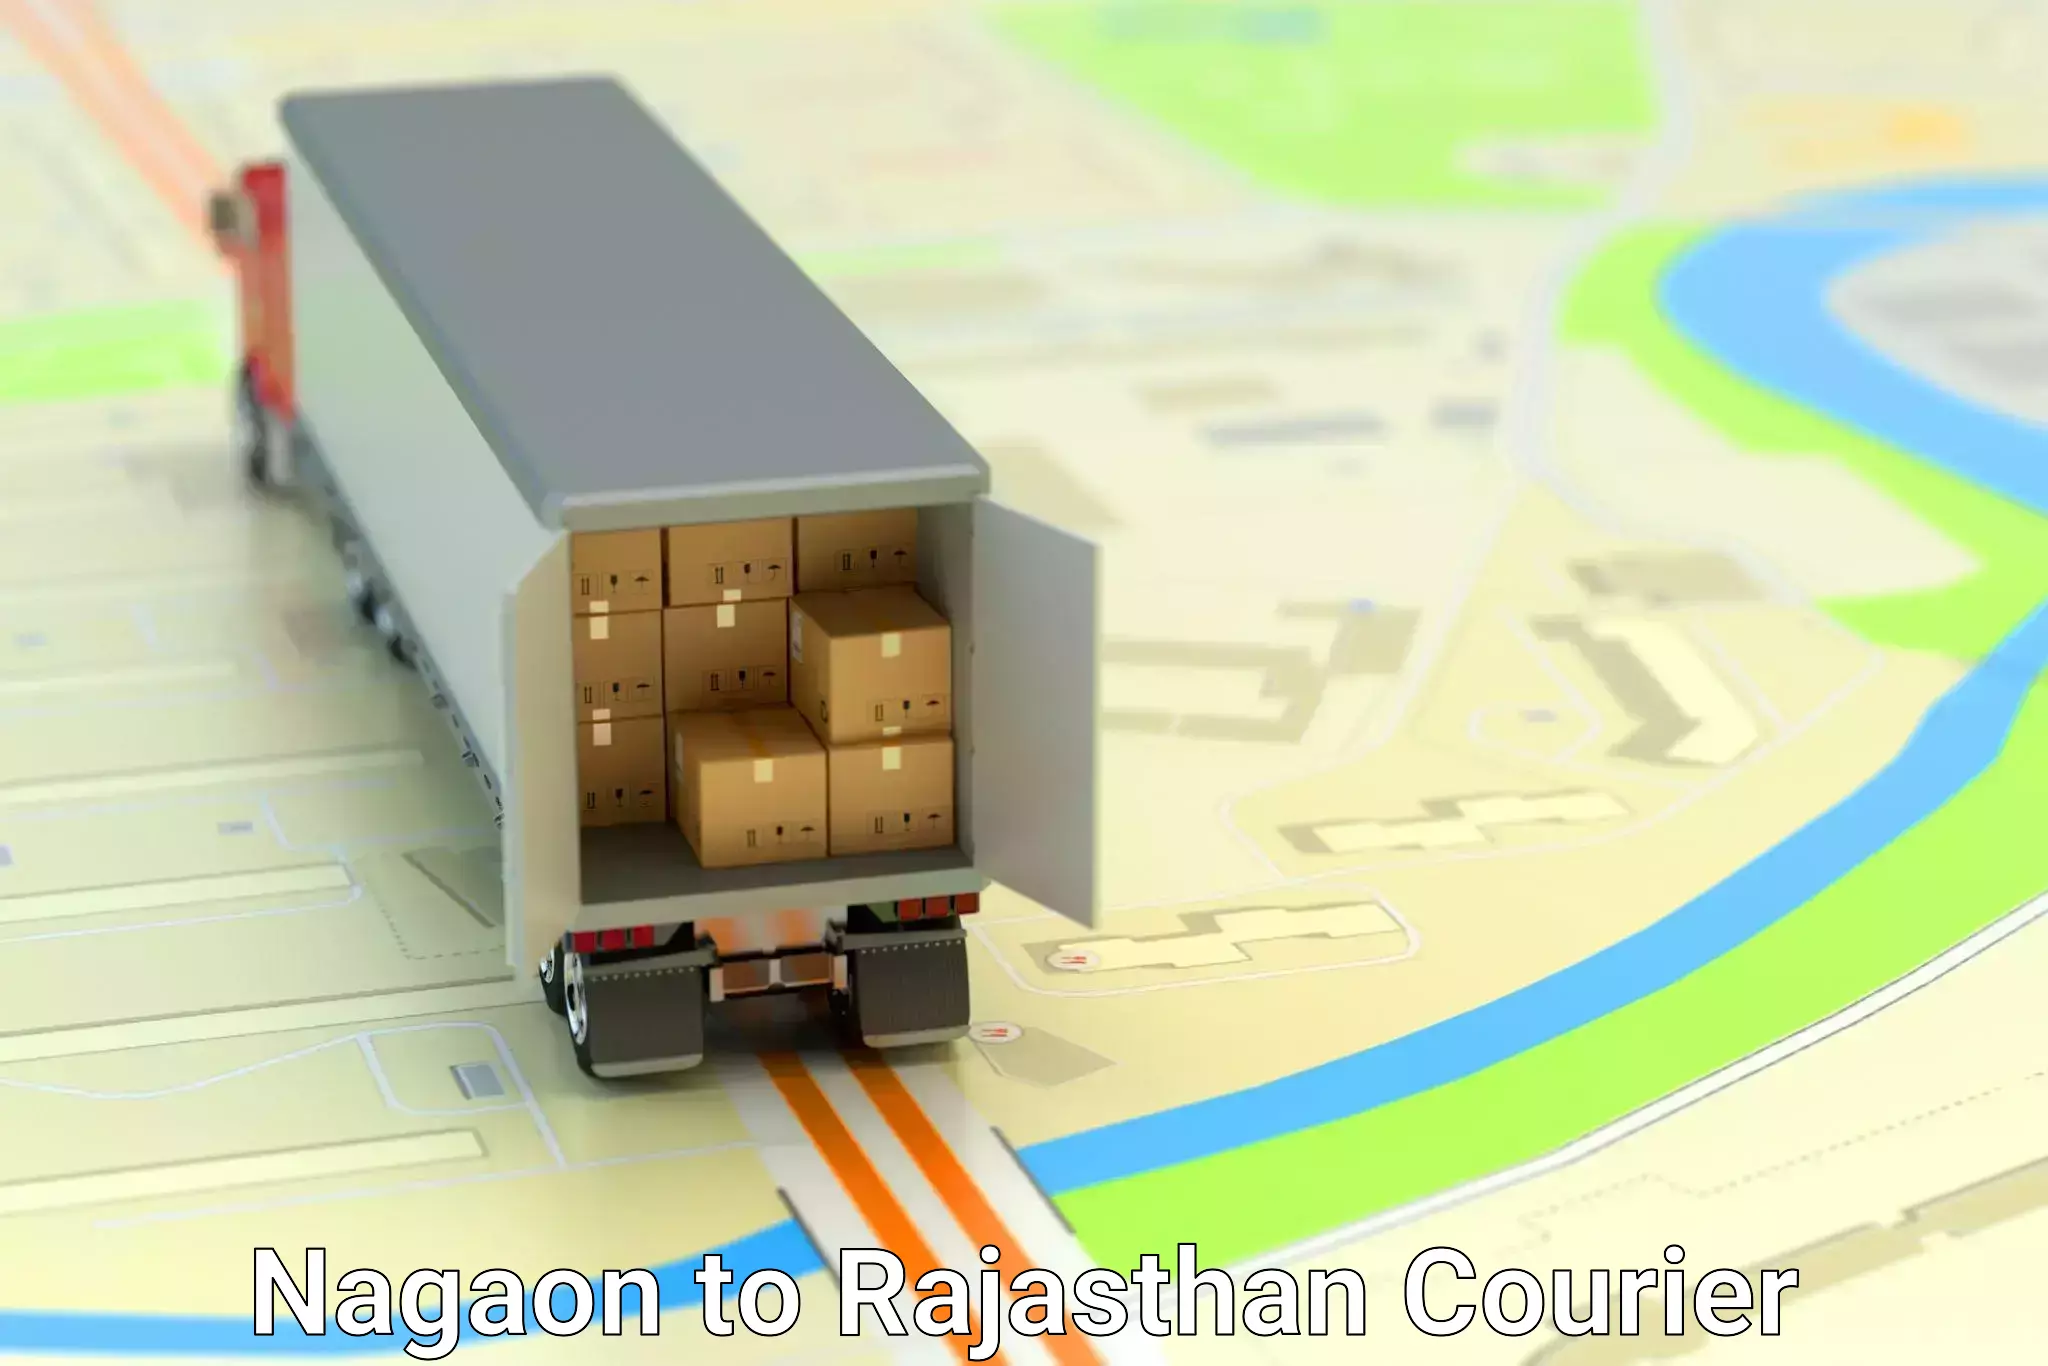 State-of-the-art courier technology Nagaon to Anupgarh